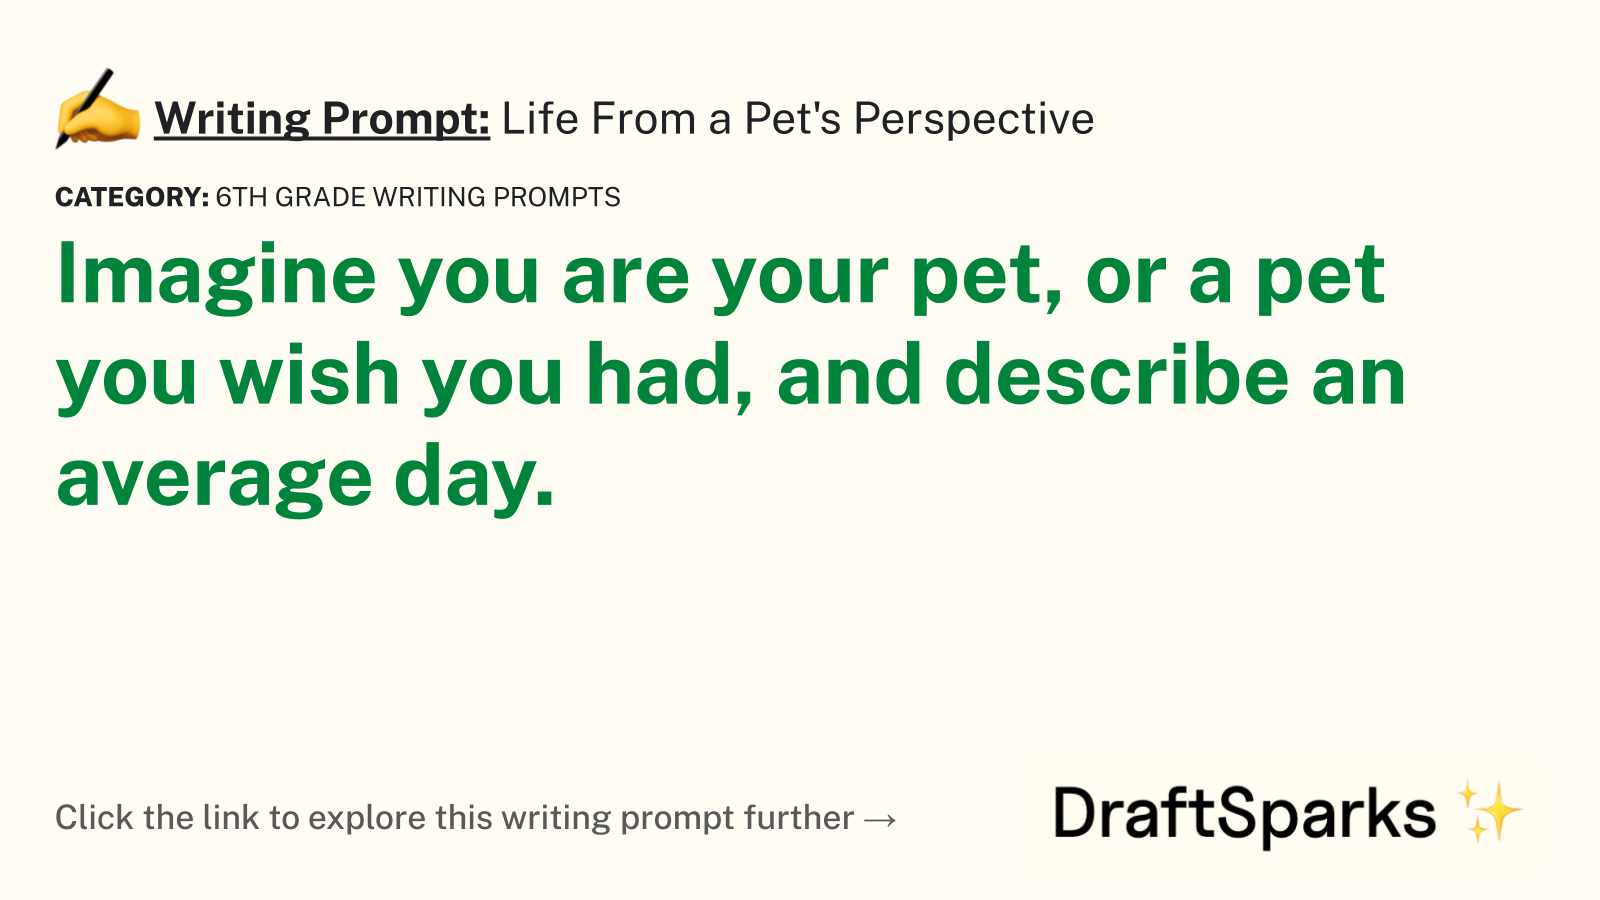 Life From a Pet’s Perspective